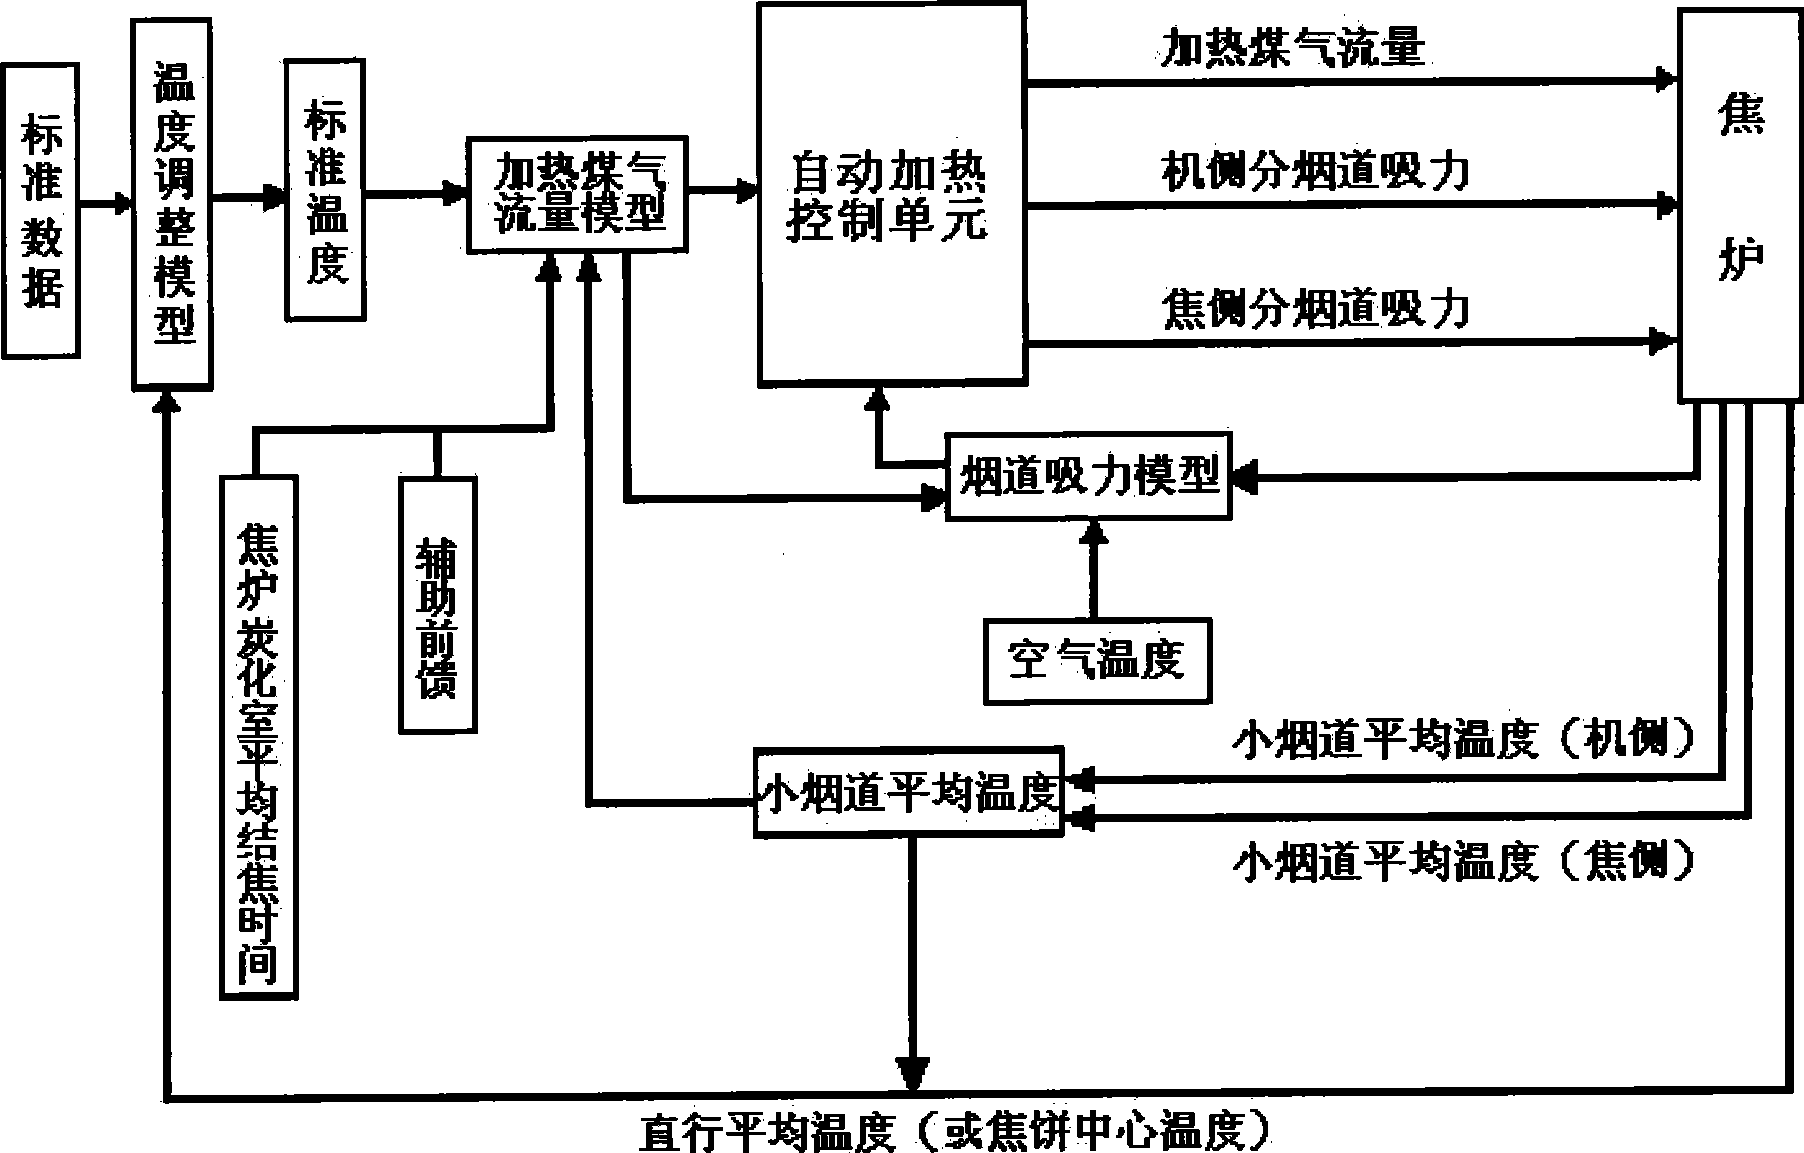 Automation control method for coke oven heating